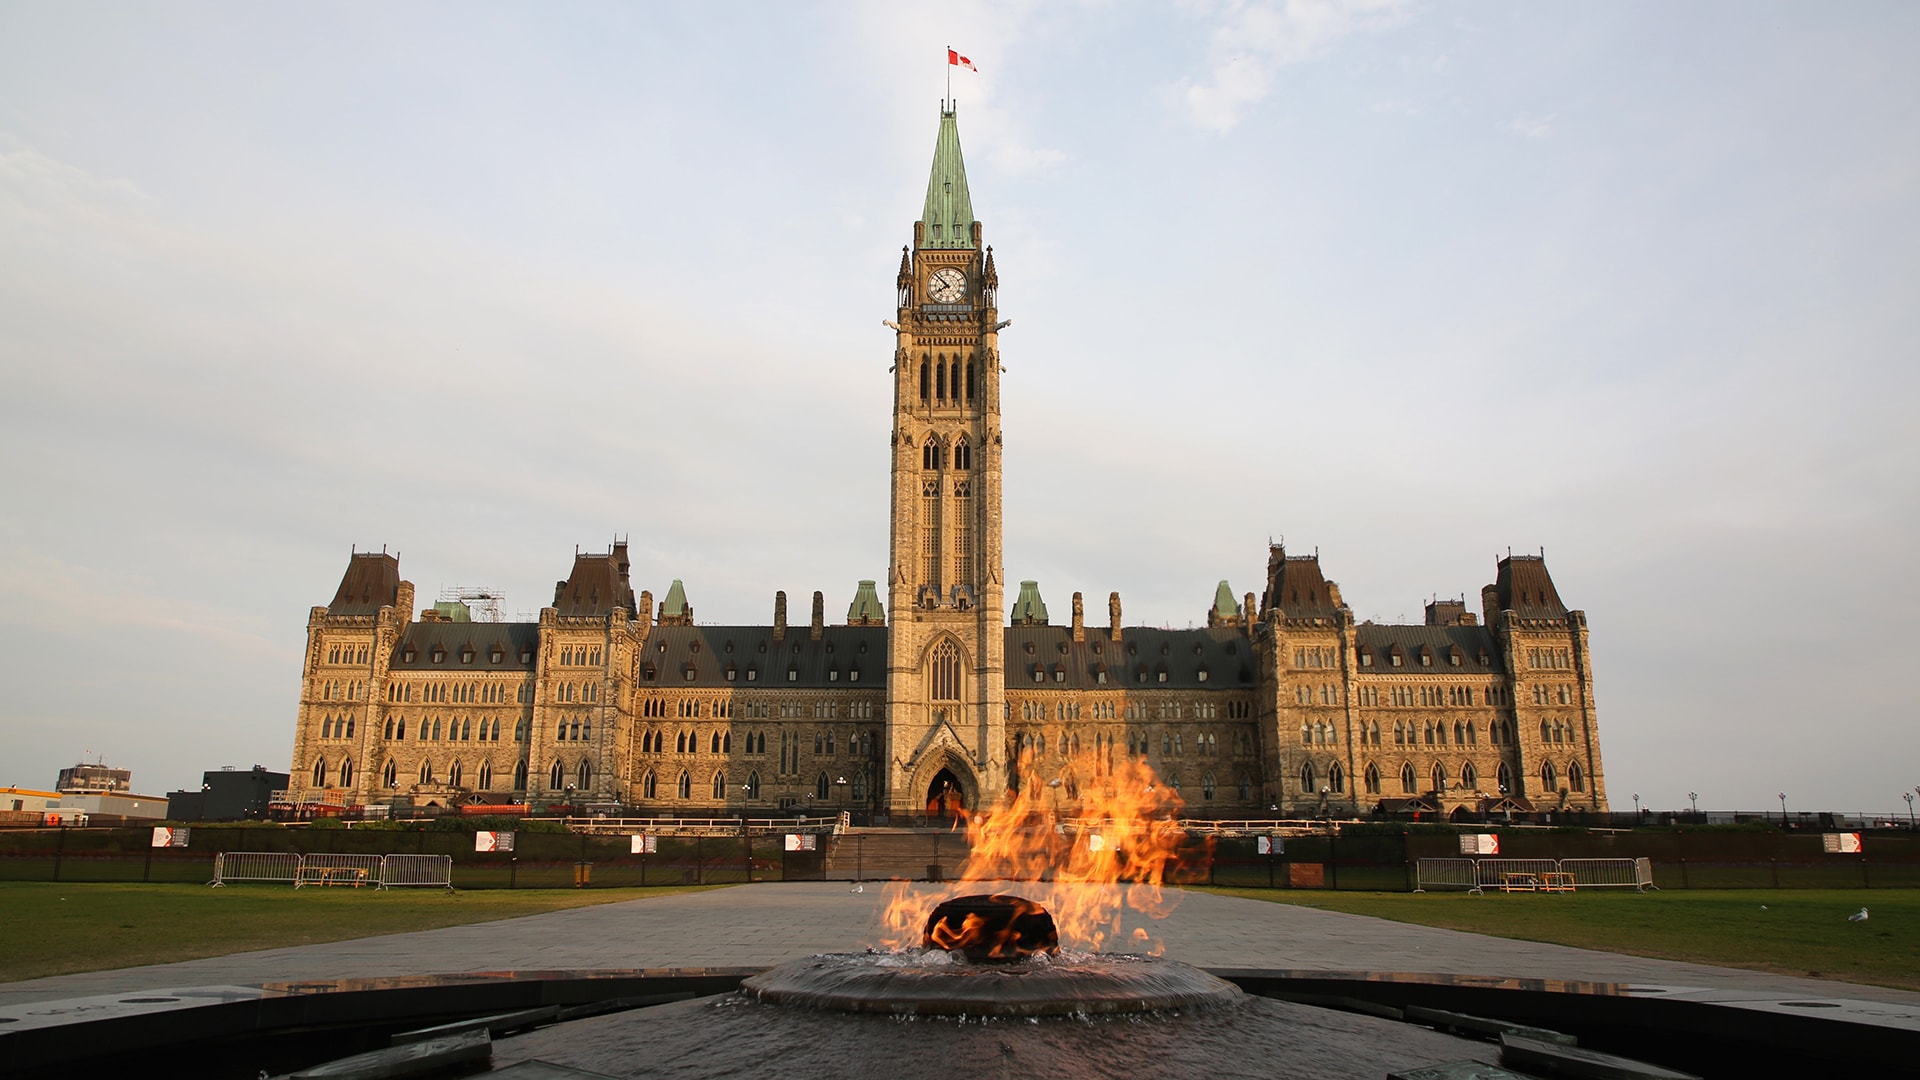 The Centennial Flame, which commemorates Canada’s 100th anniversary as a Confederation, burns in front of the Centre Block building in Ottawa.